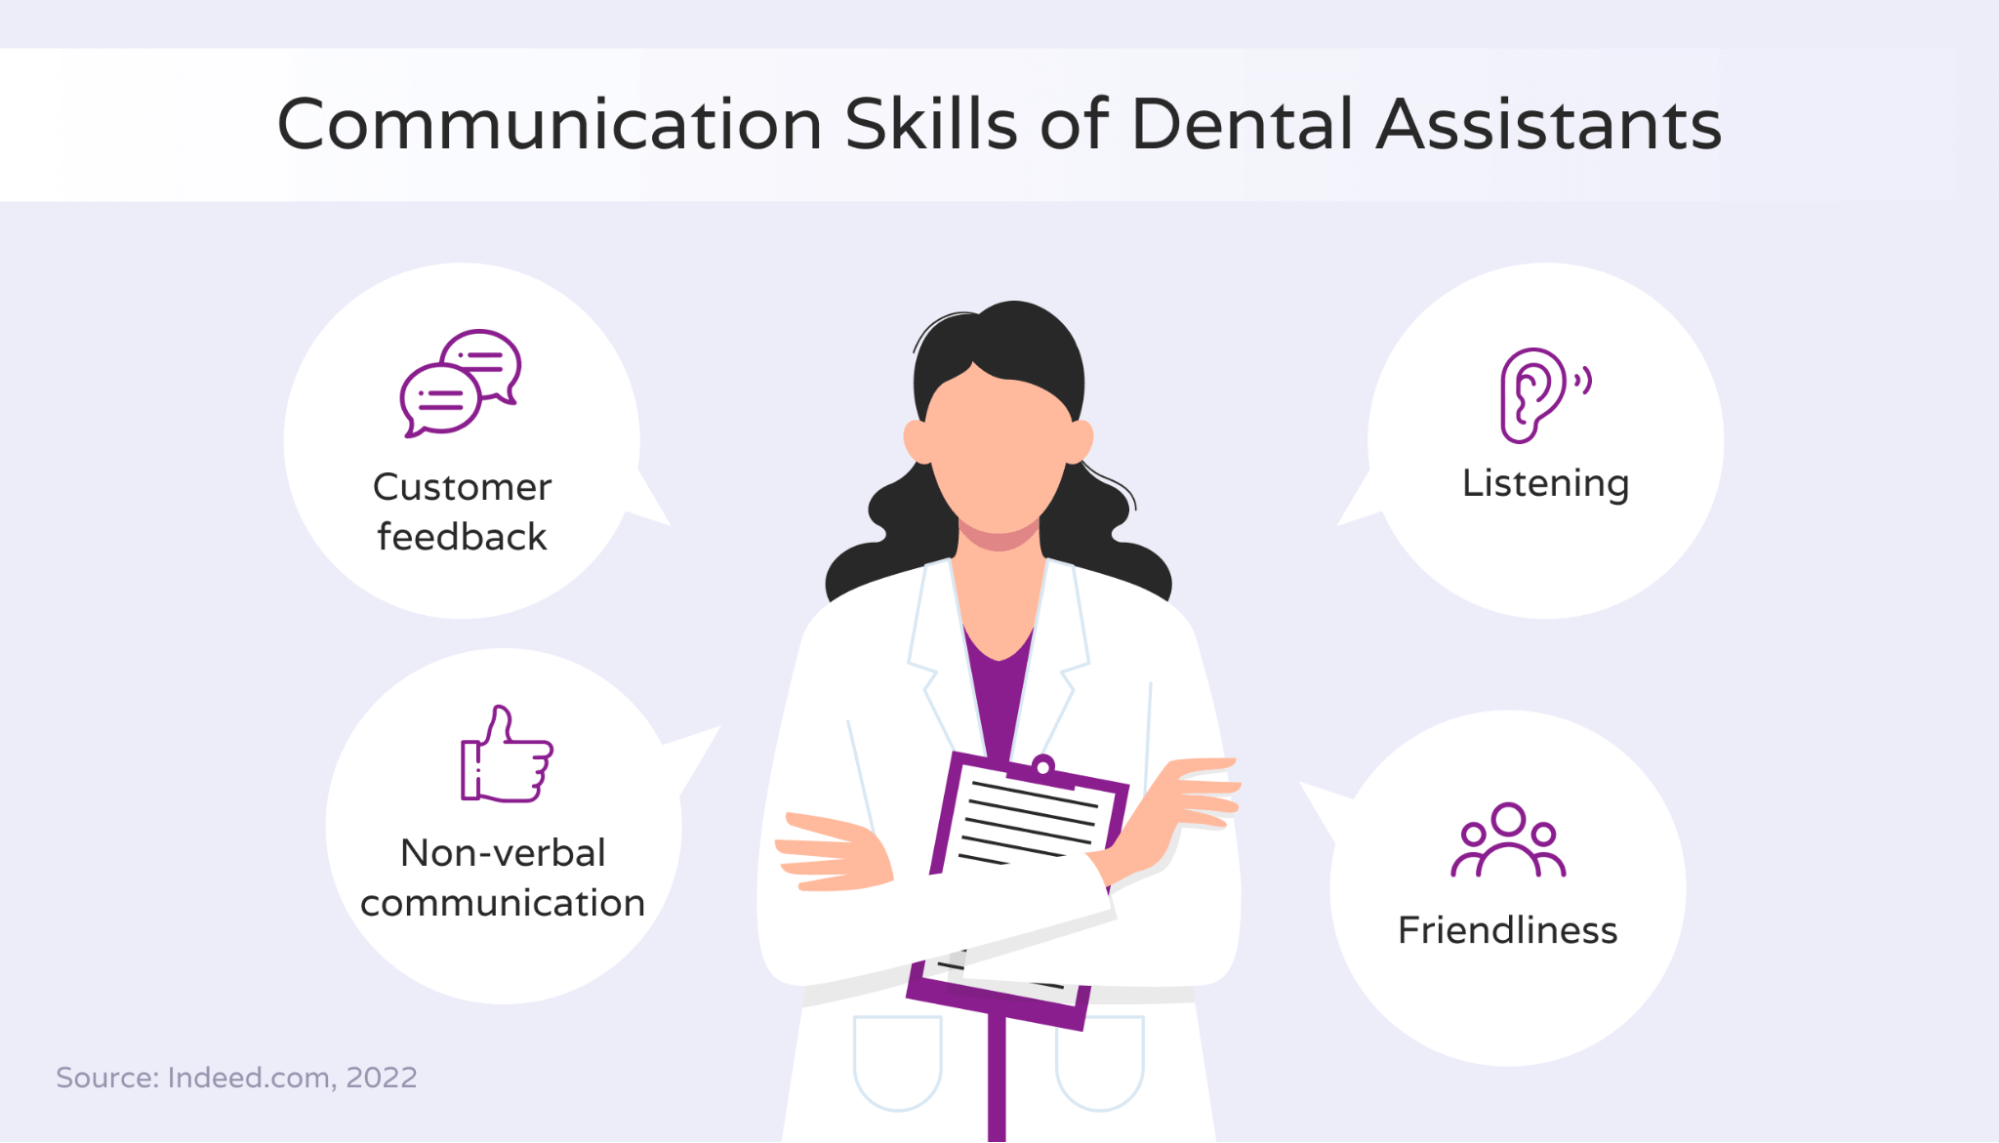 Image showing different communication skills that dental assistants need